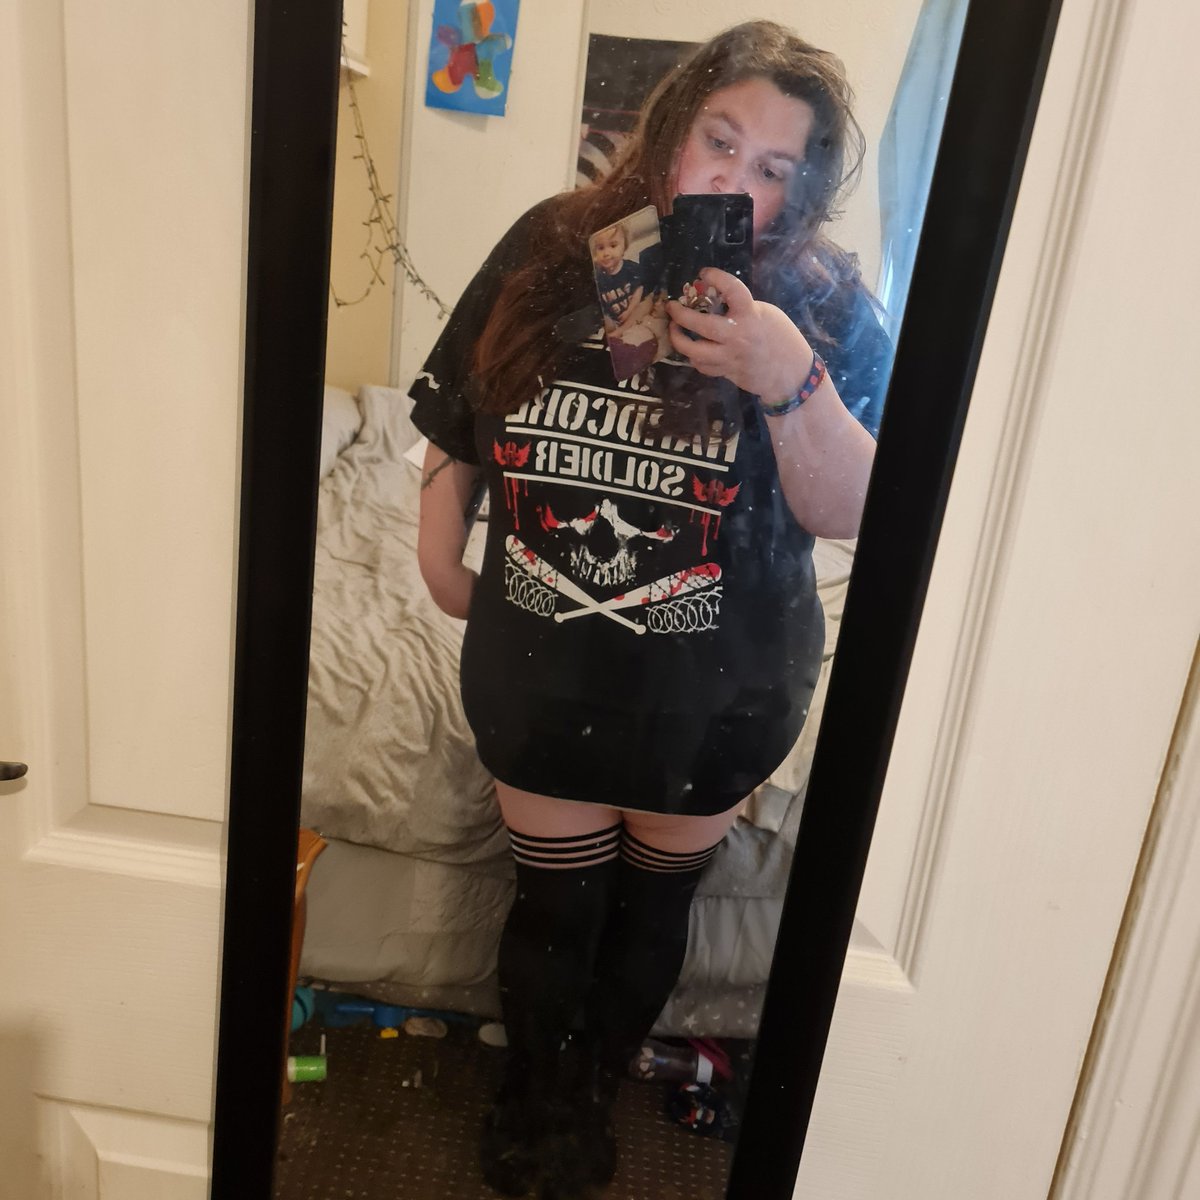 Showing my love for @THETOMMYDREAMER and @HouseofHardcore #Facts #Sorrynotsorry